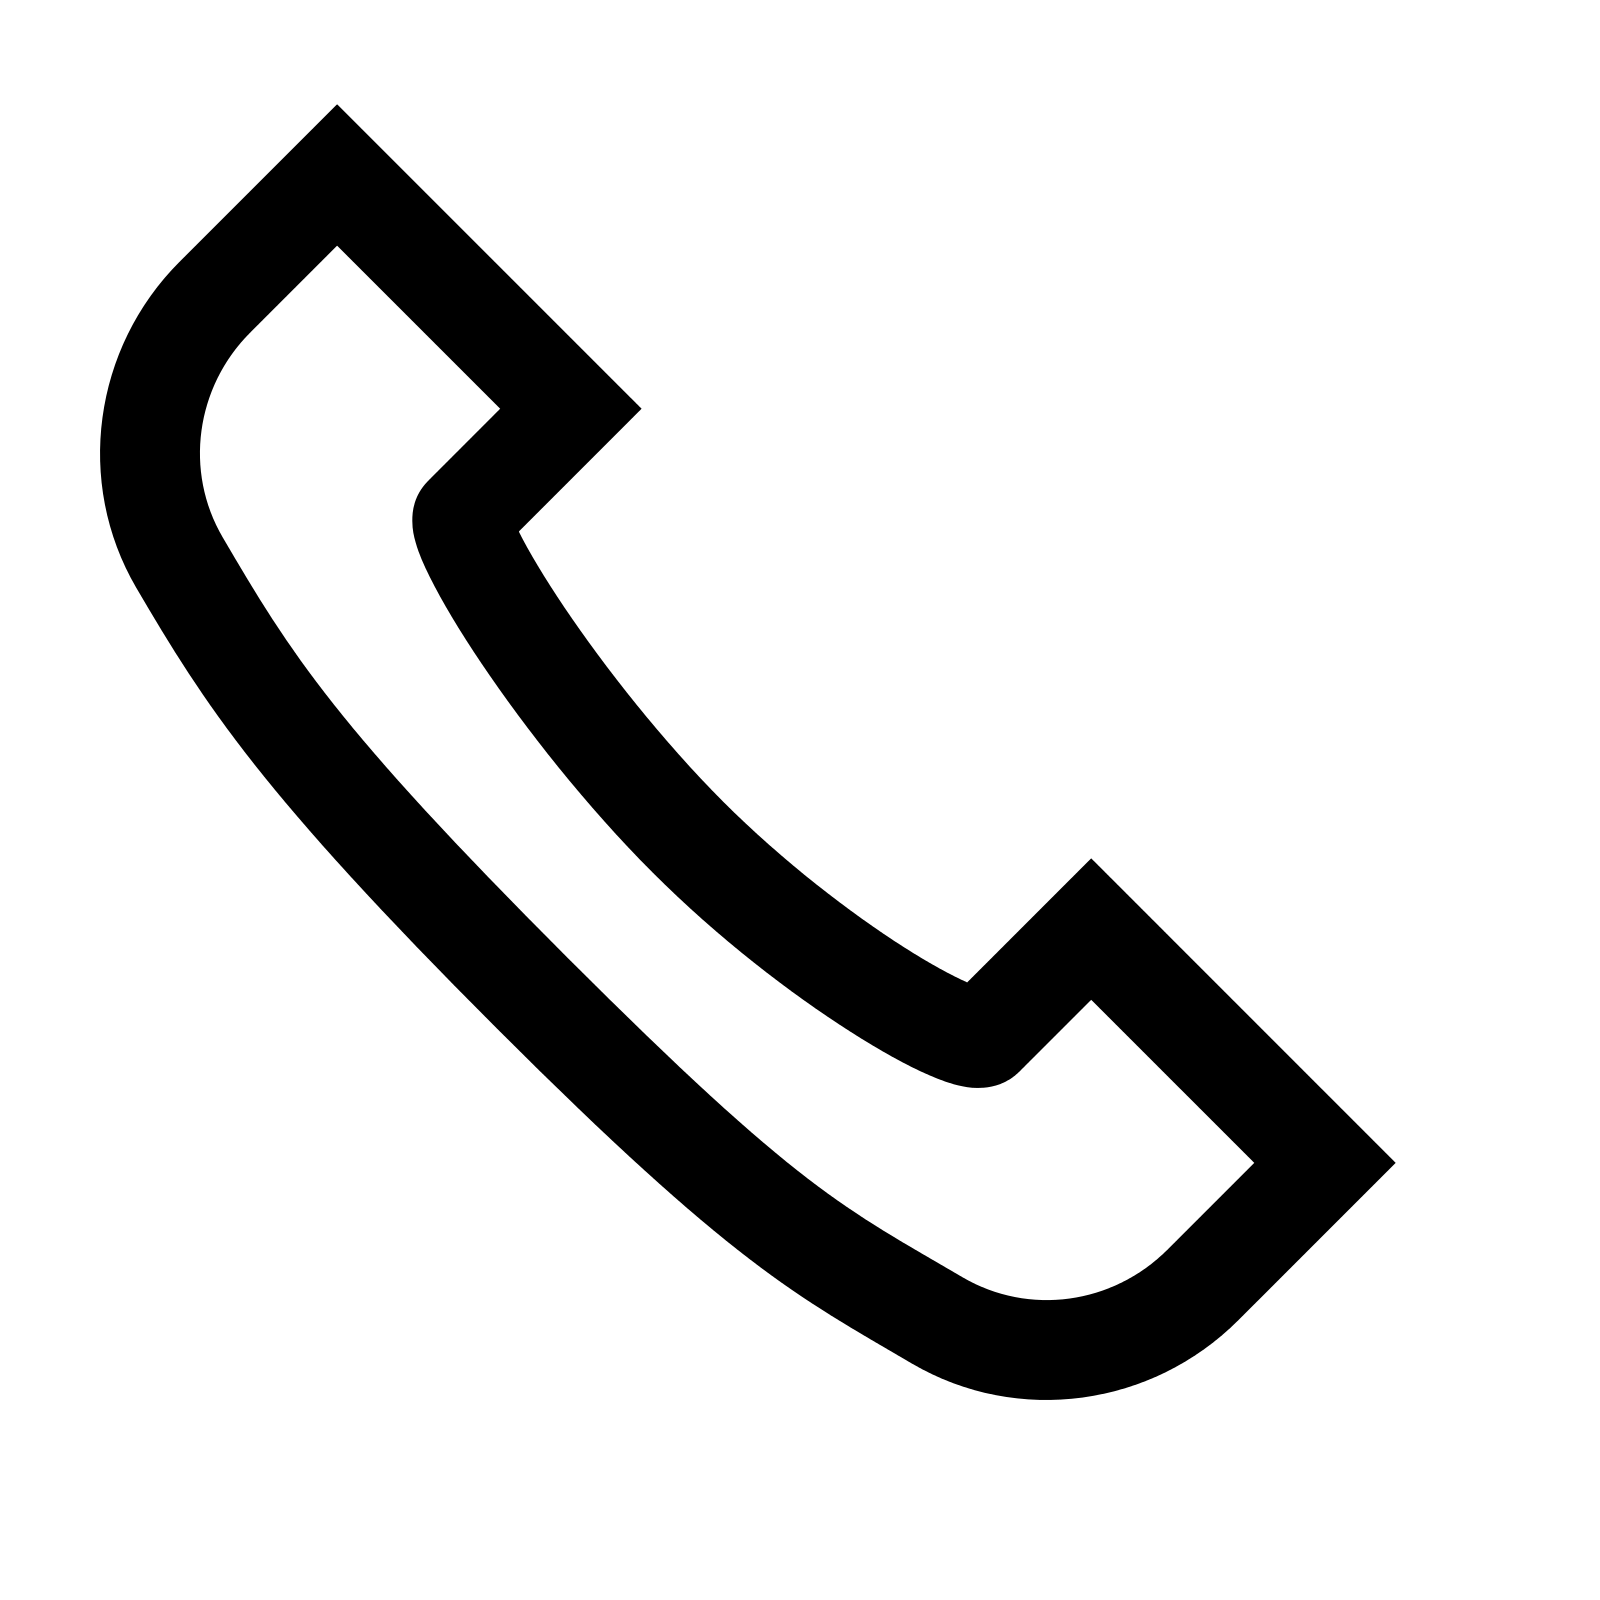 Small Telephone Logo - Free Cell Phone Icon For Email Signature 319397 | Download Cell ...